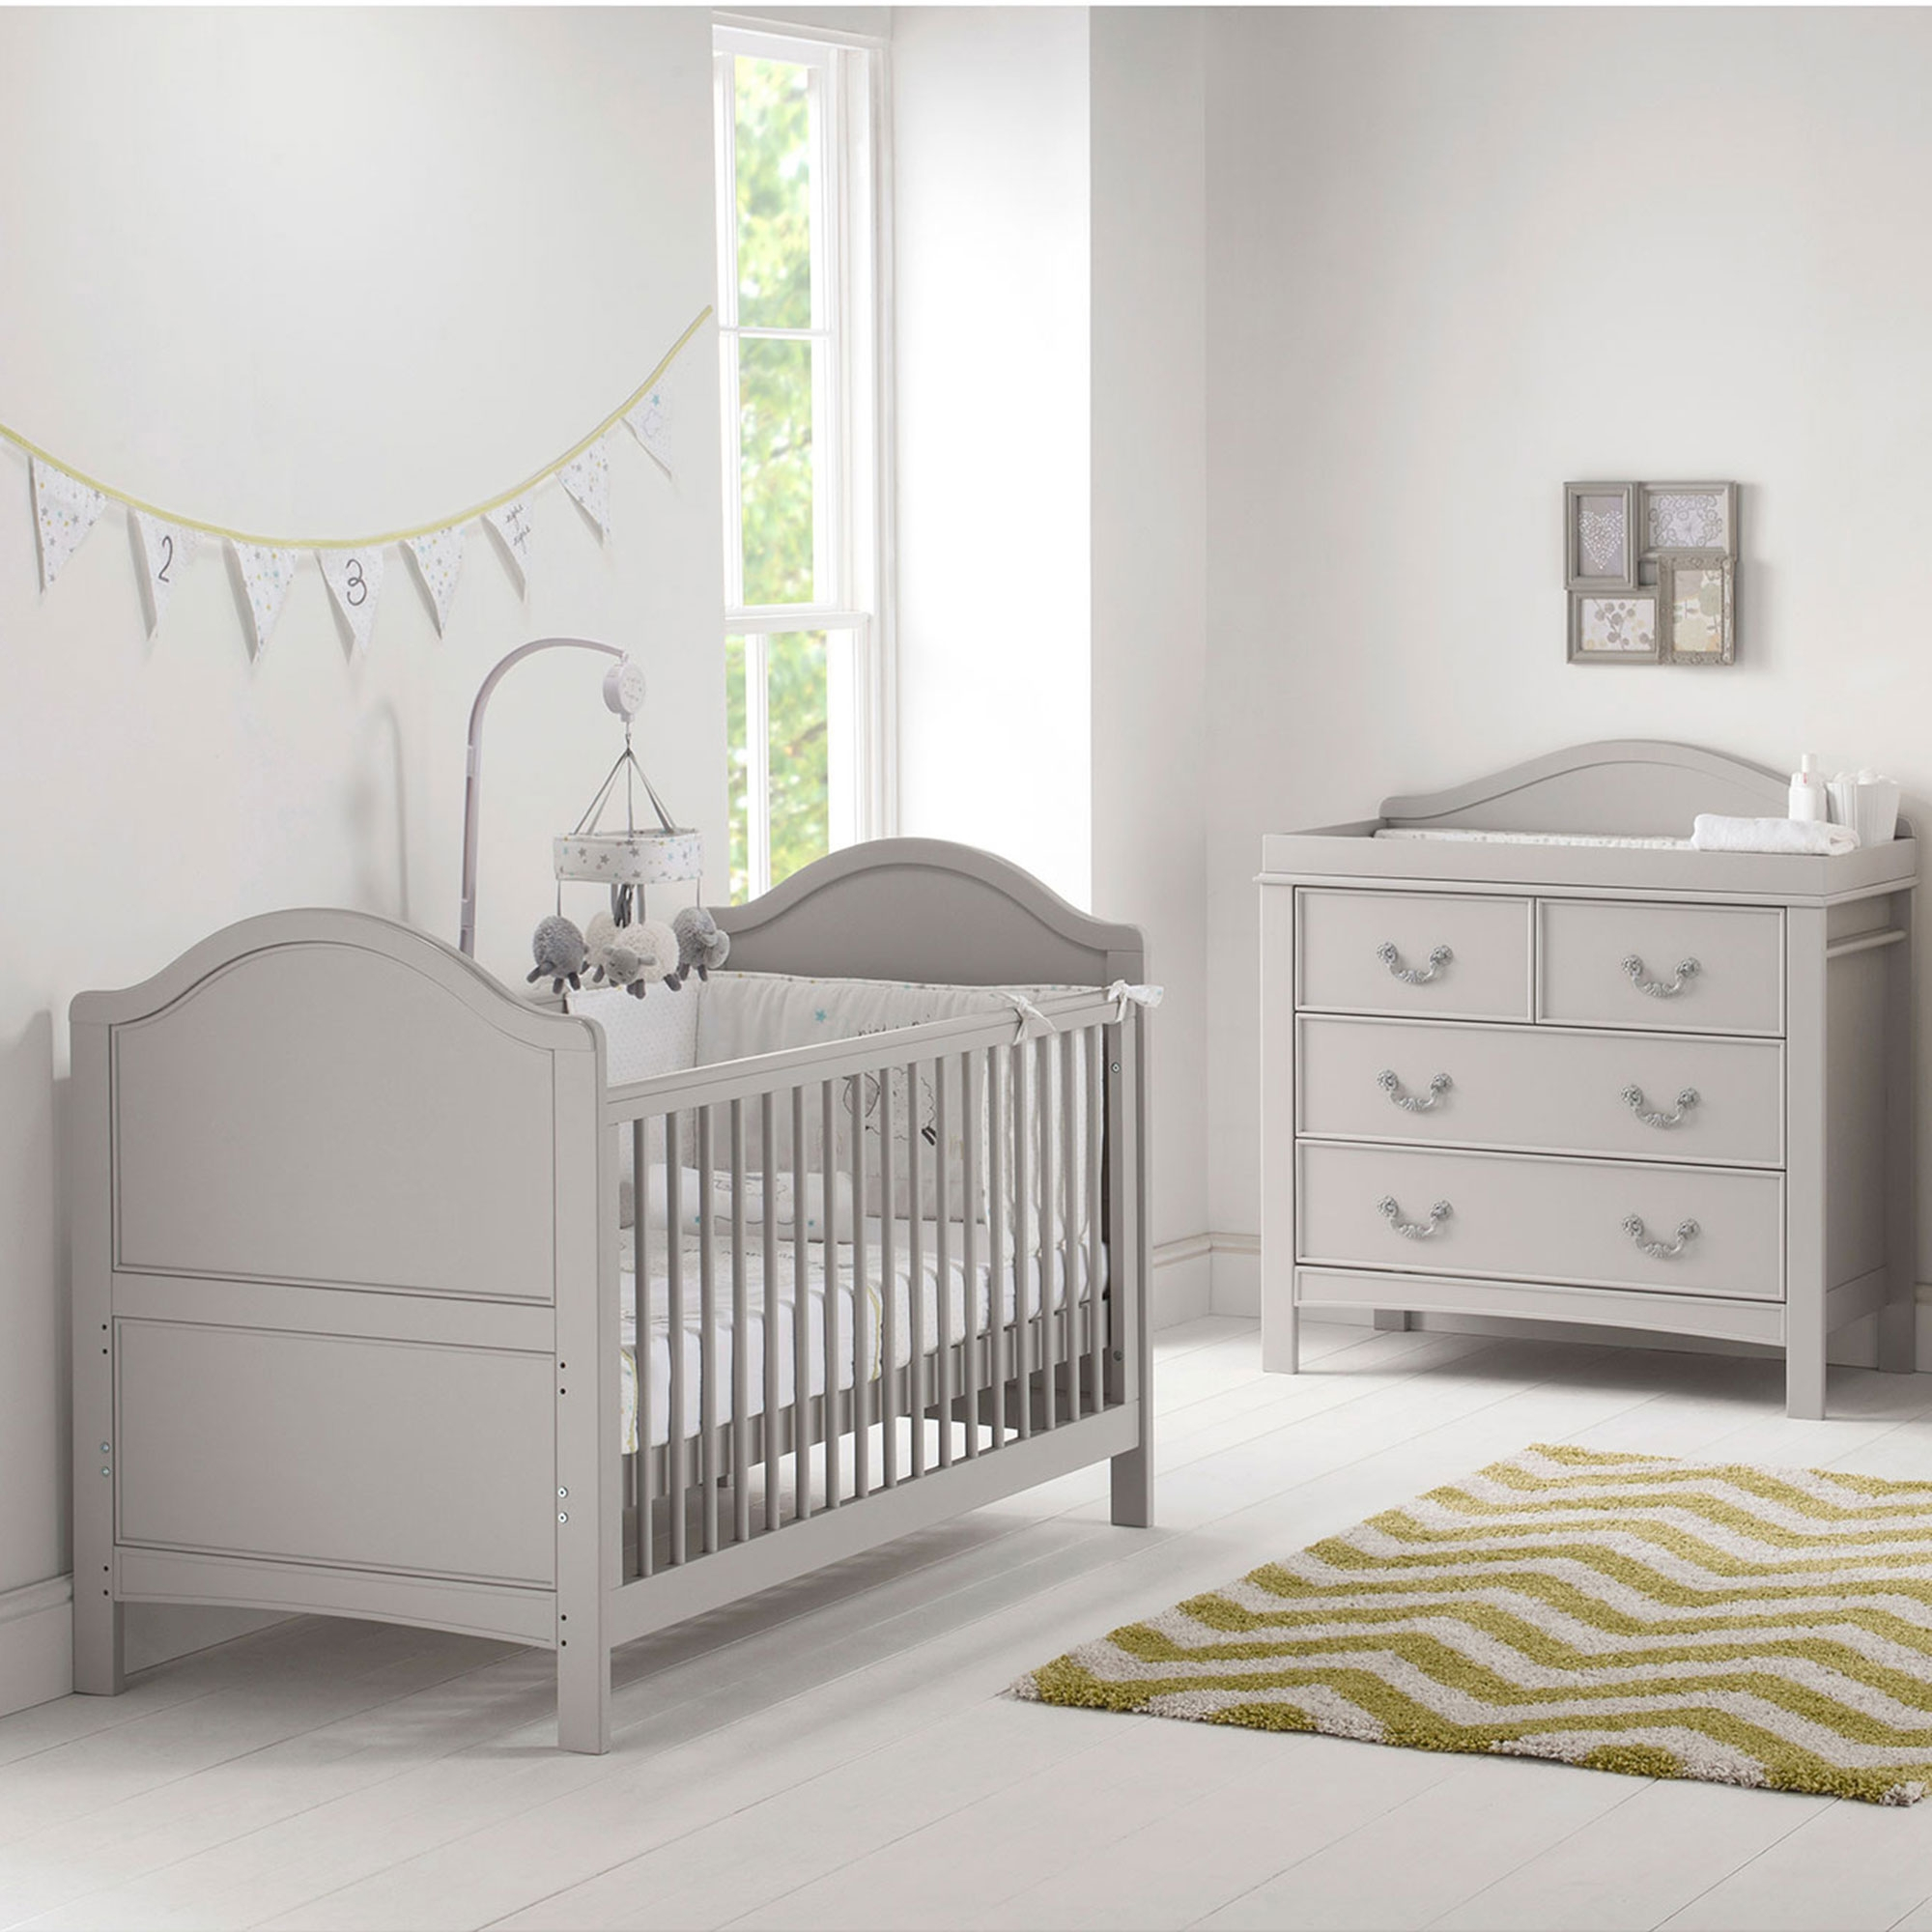 Details About East Coast Nursery Furniture Cot Beddresser Toulouse 2 Piece Room Set In Grey for size 2000 X 2000